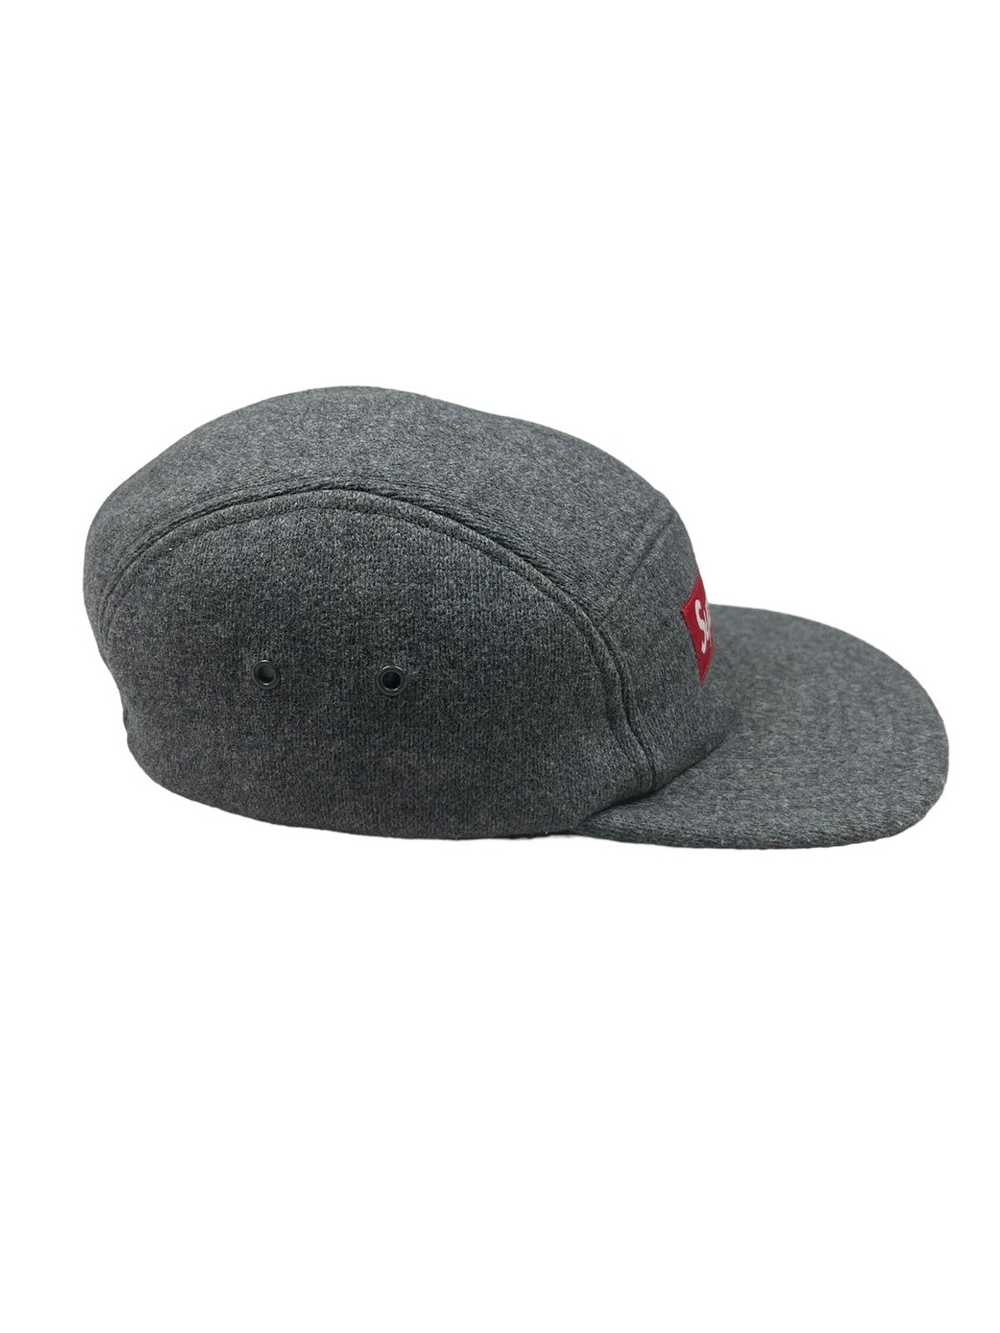 Supreme Supreme Wool Fitted Camp Cap - image 6